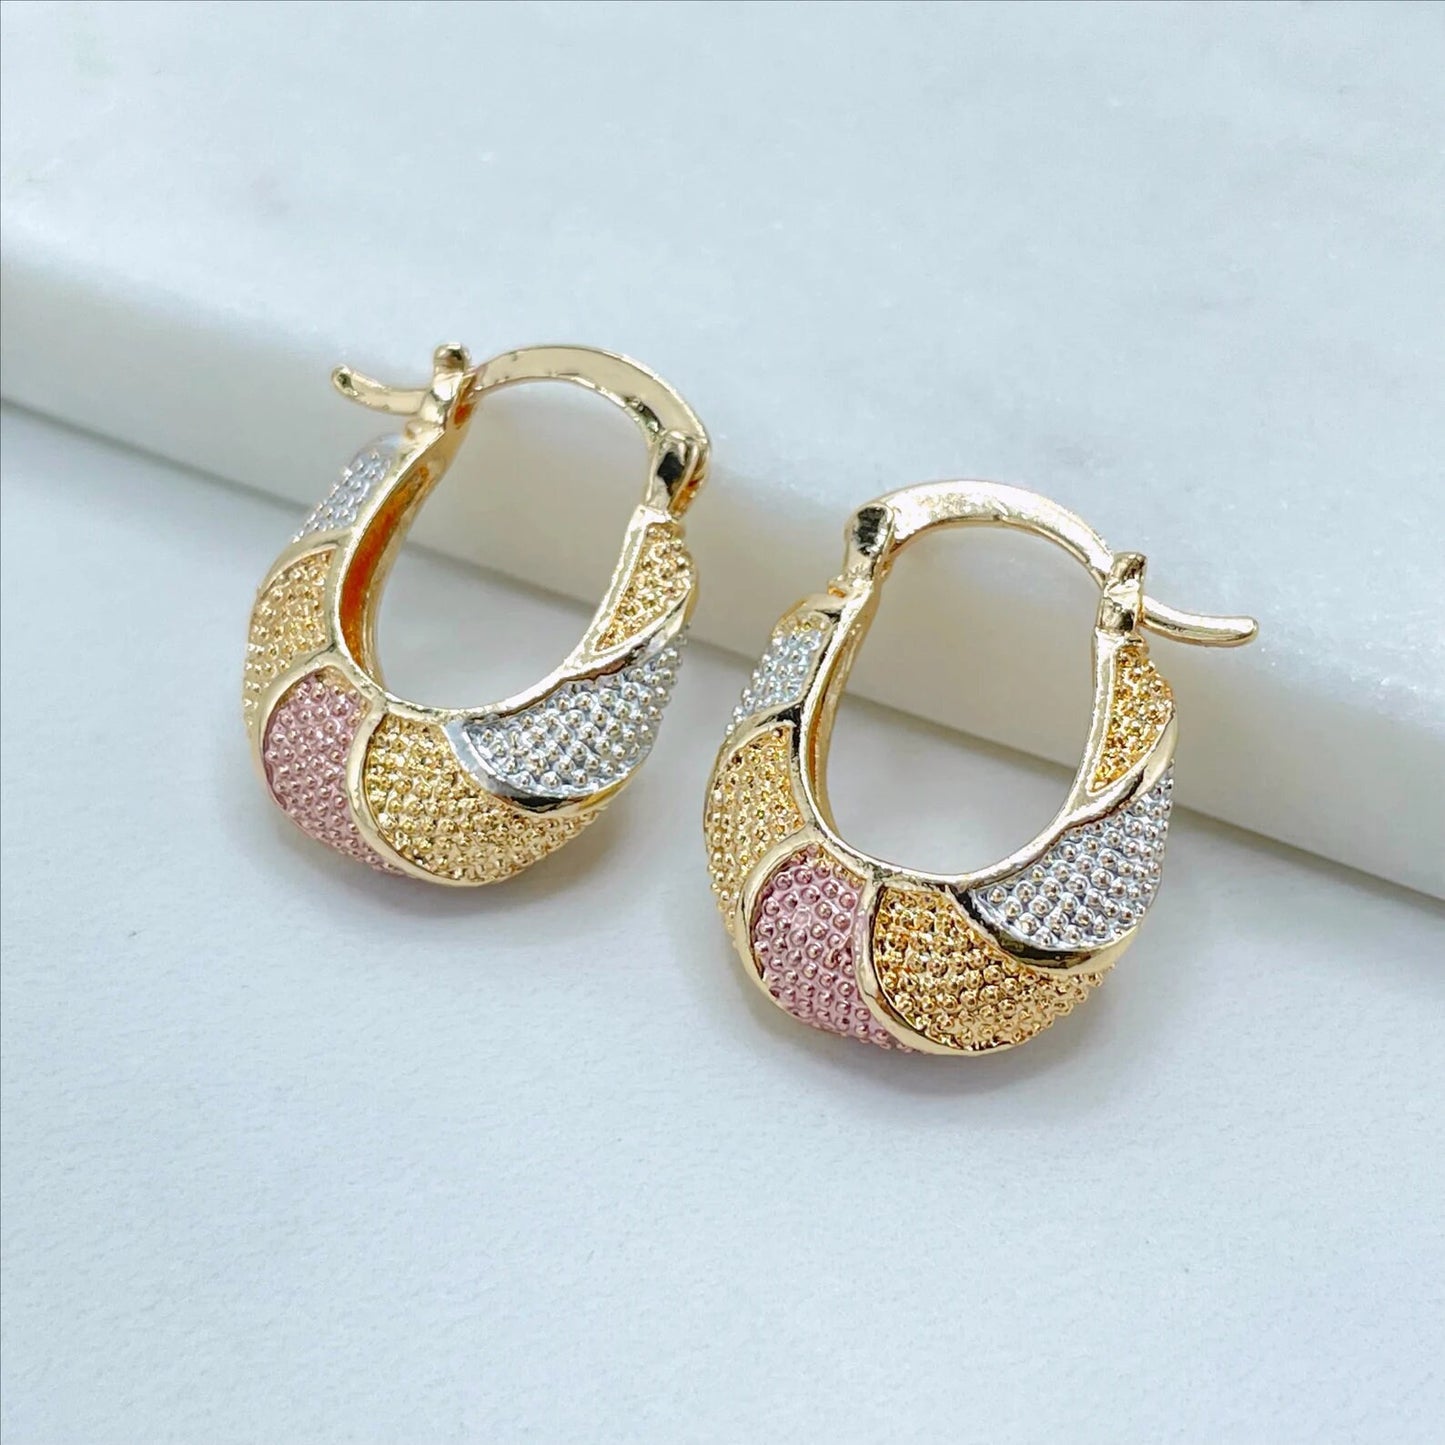 18k Gold Filled Three Tone Earrings Wholesale Jewelry Making Supplies